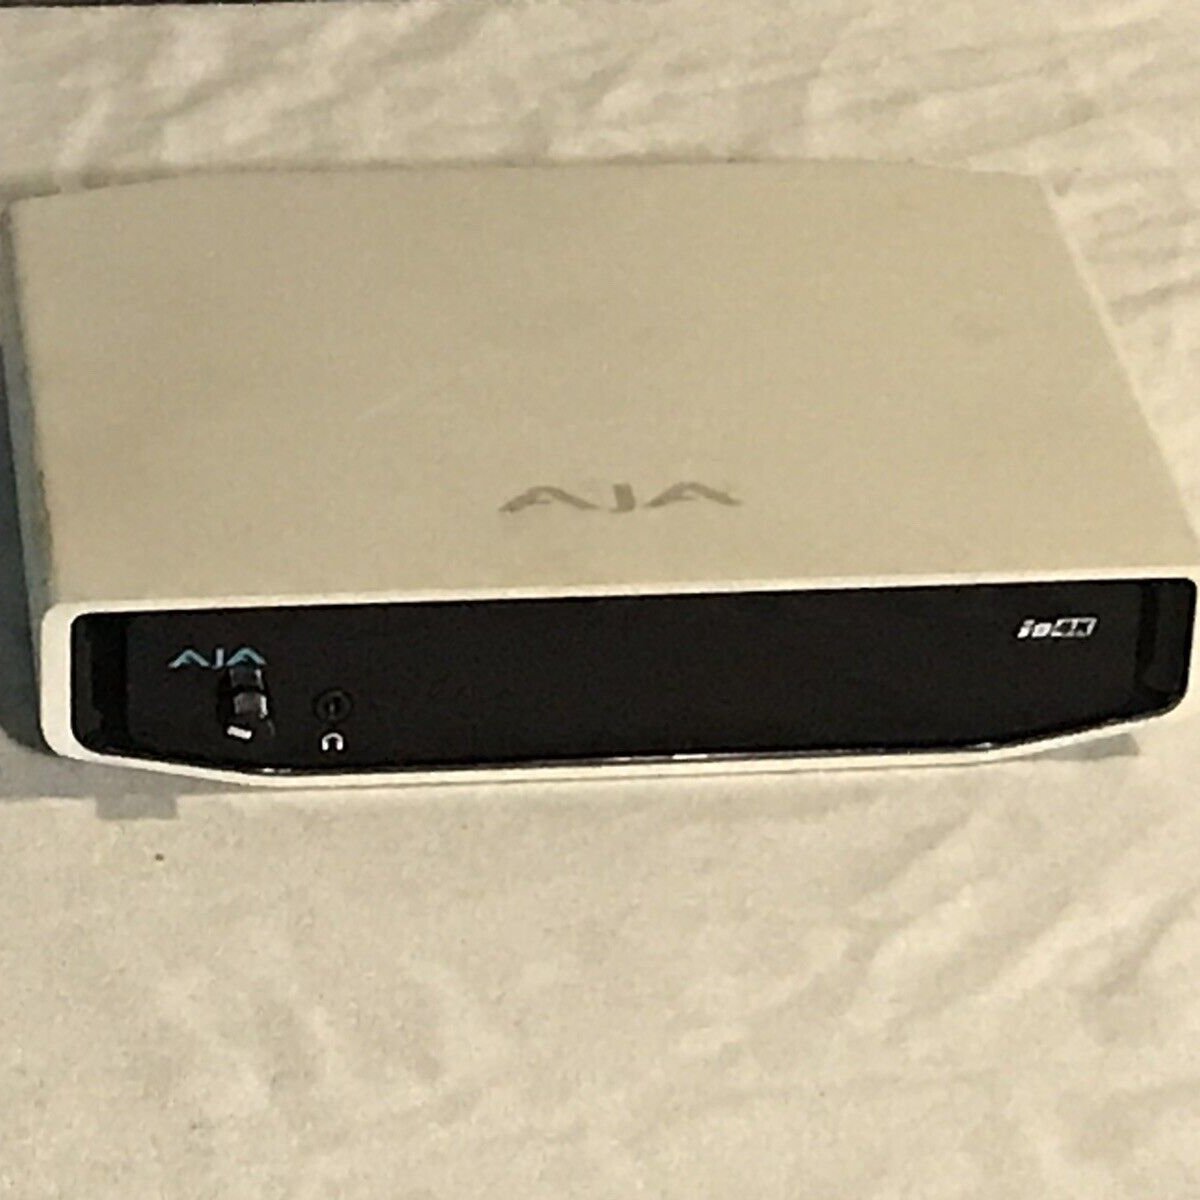 AJA IO-4K Video I/O for Thunderbolt 2 - Unit Only No Power Supply Included